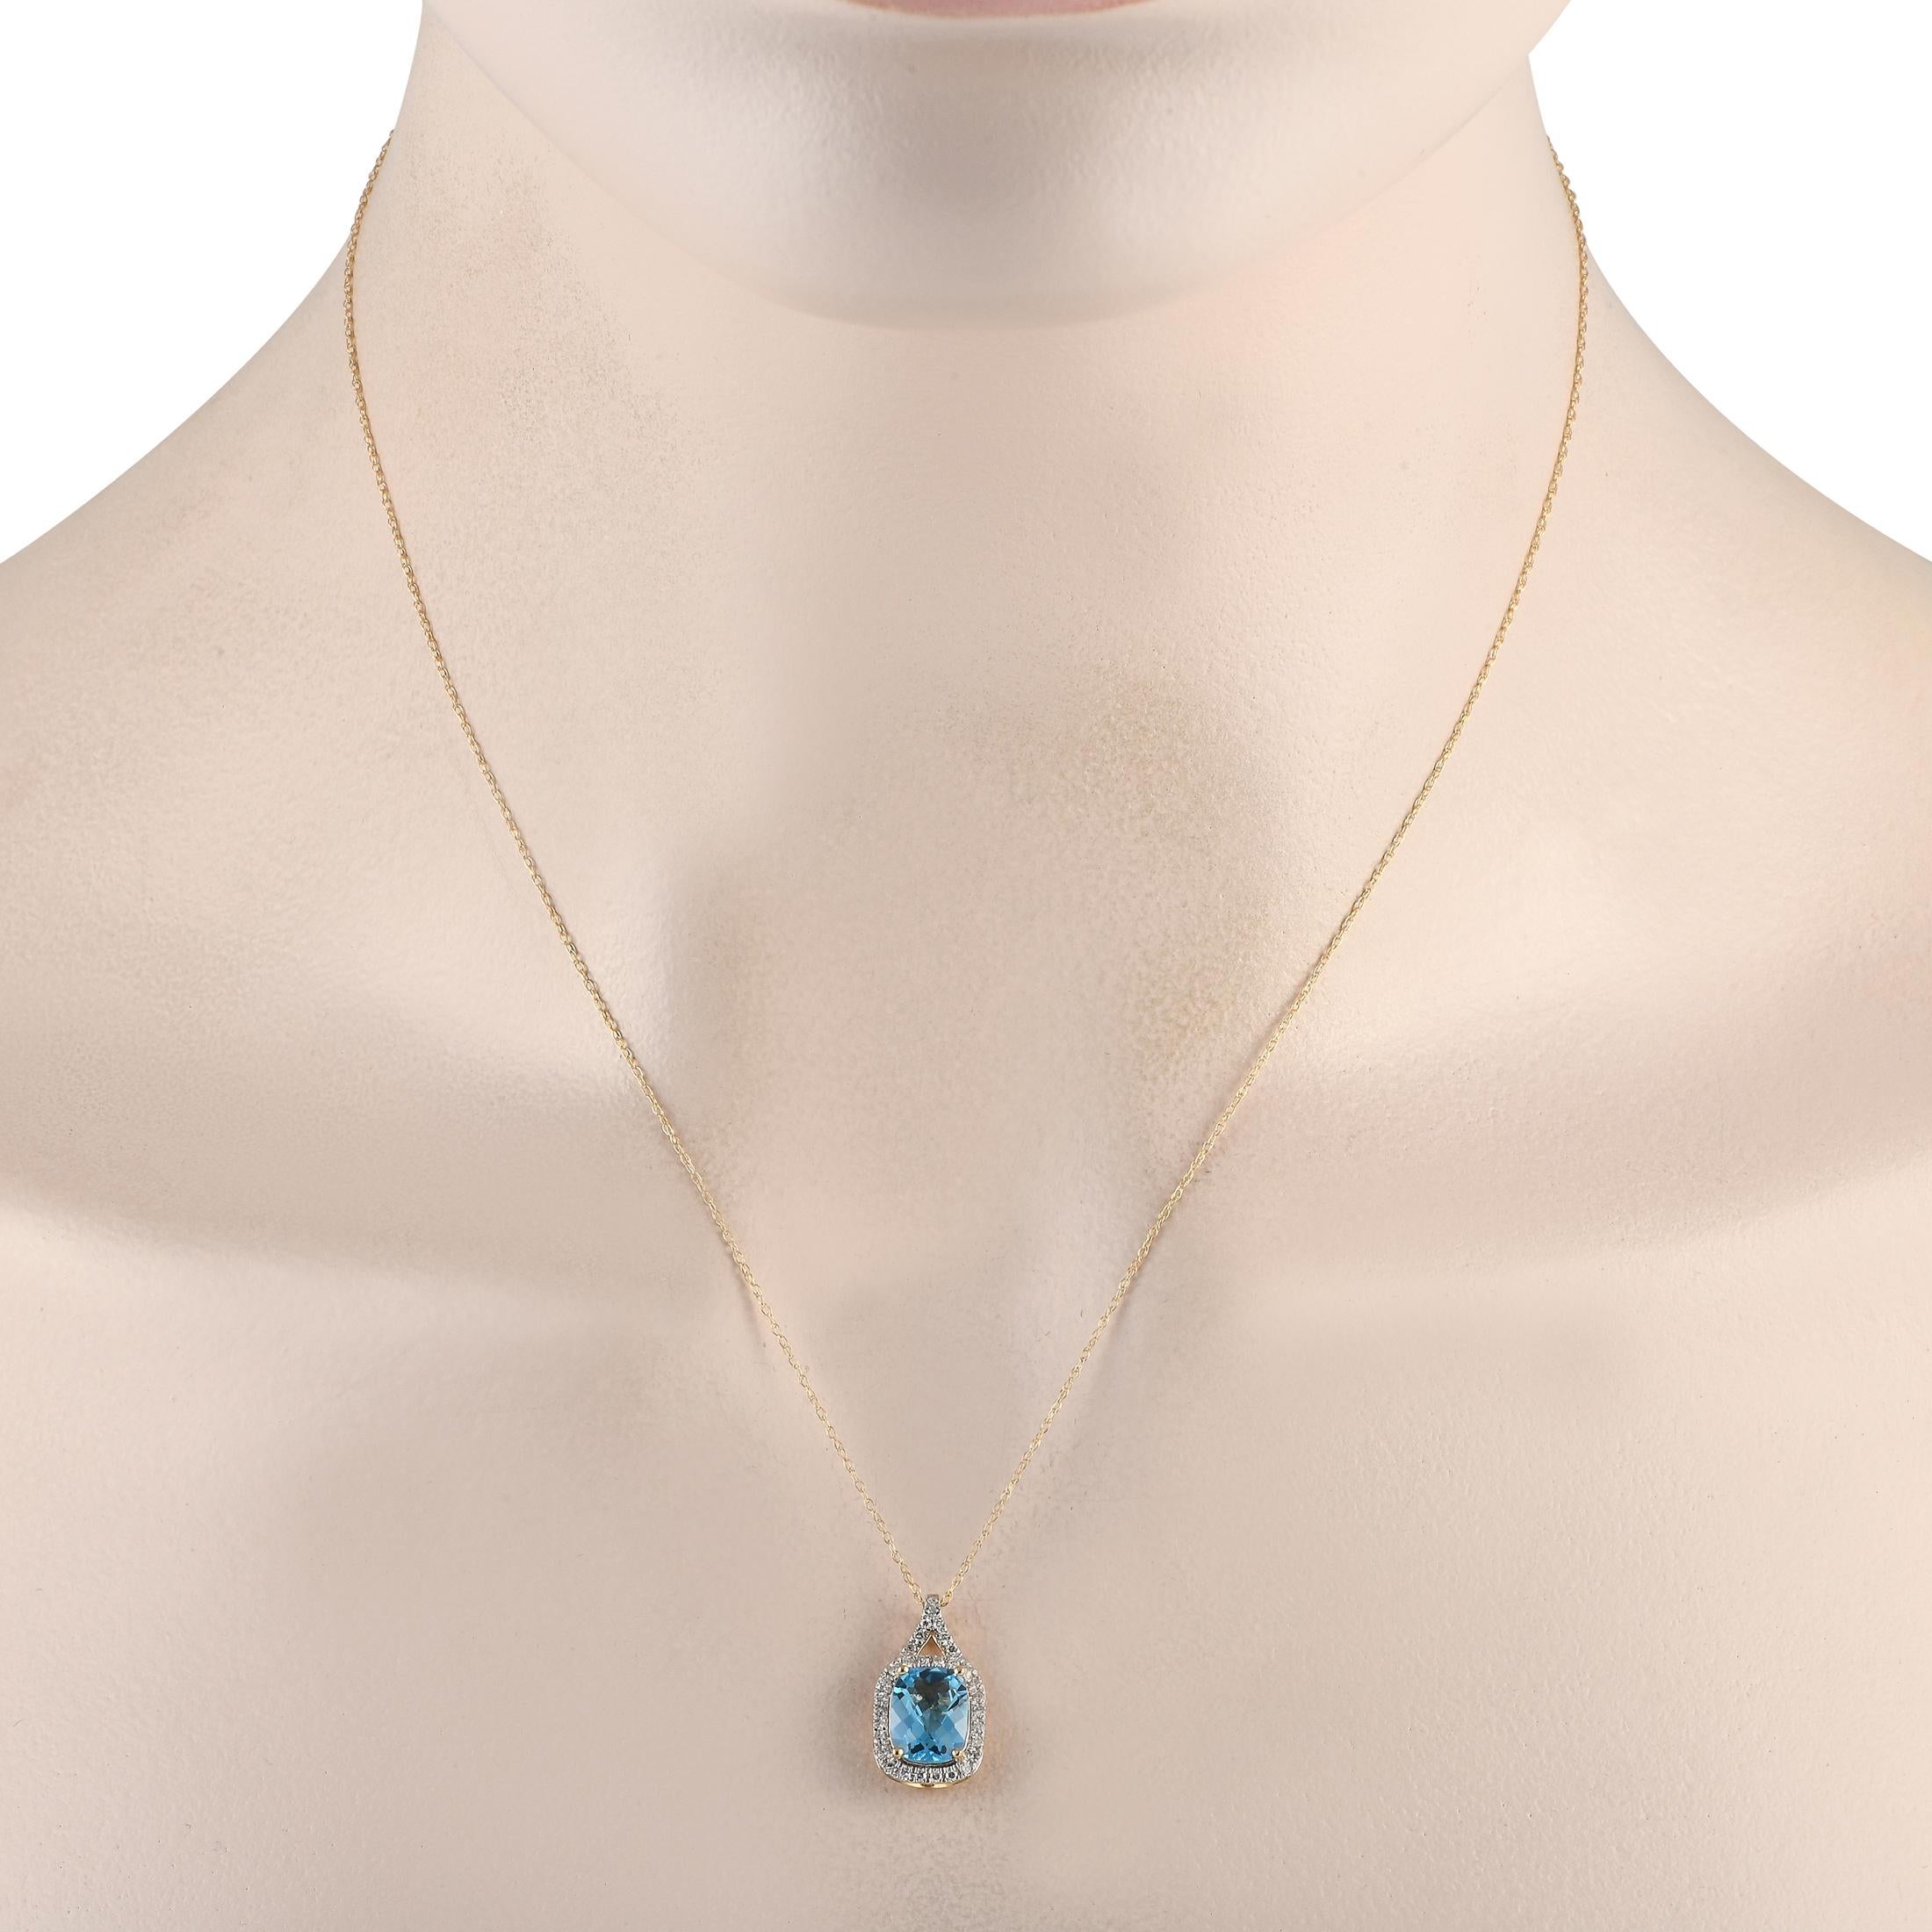 Marked with an exquisite sky blue gemstone, this diamond and blue topaz necklace is something you'll find yourself reaching for on special days. The necklace features a splitting bail that continues to a rectangular halo with rounded corners. Right